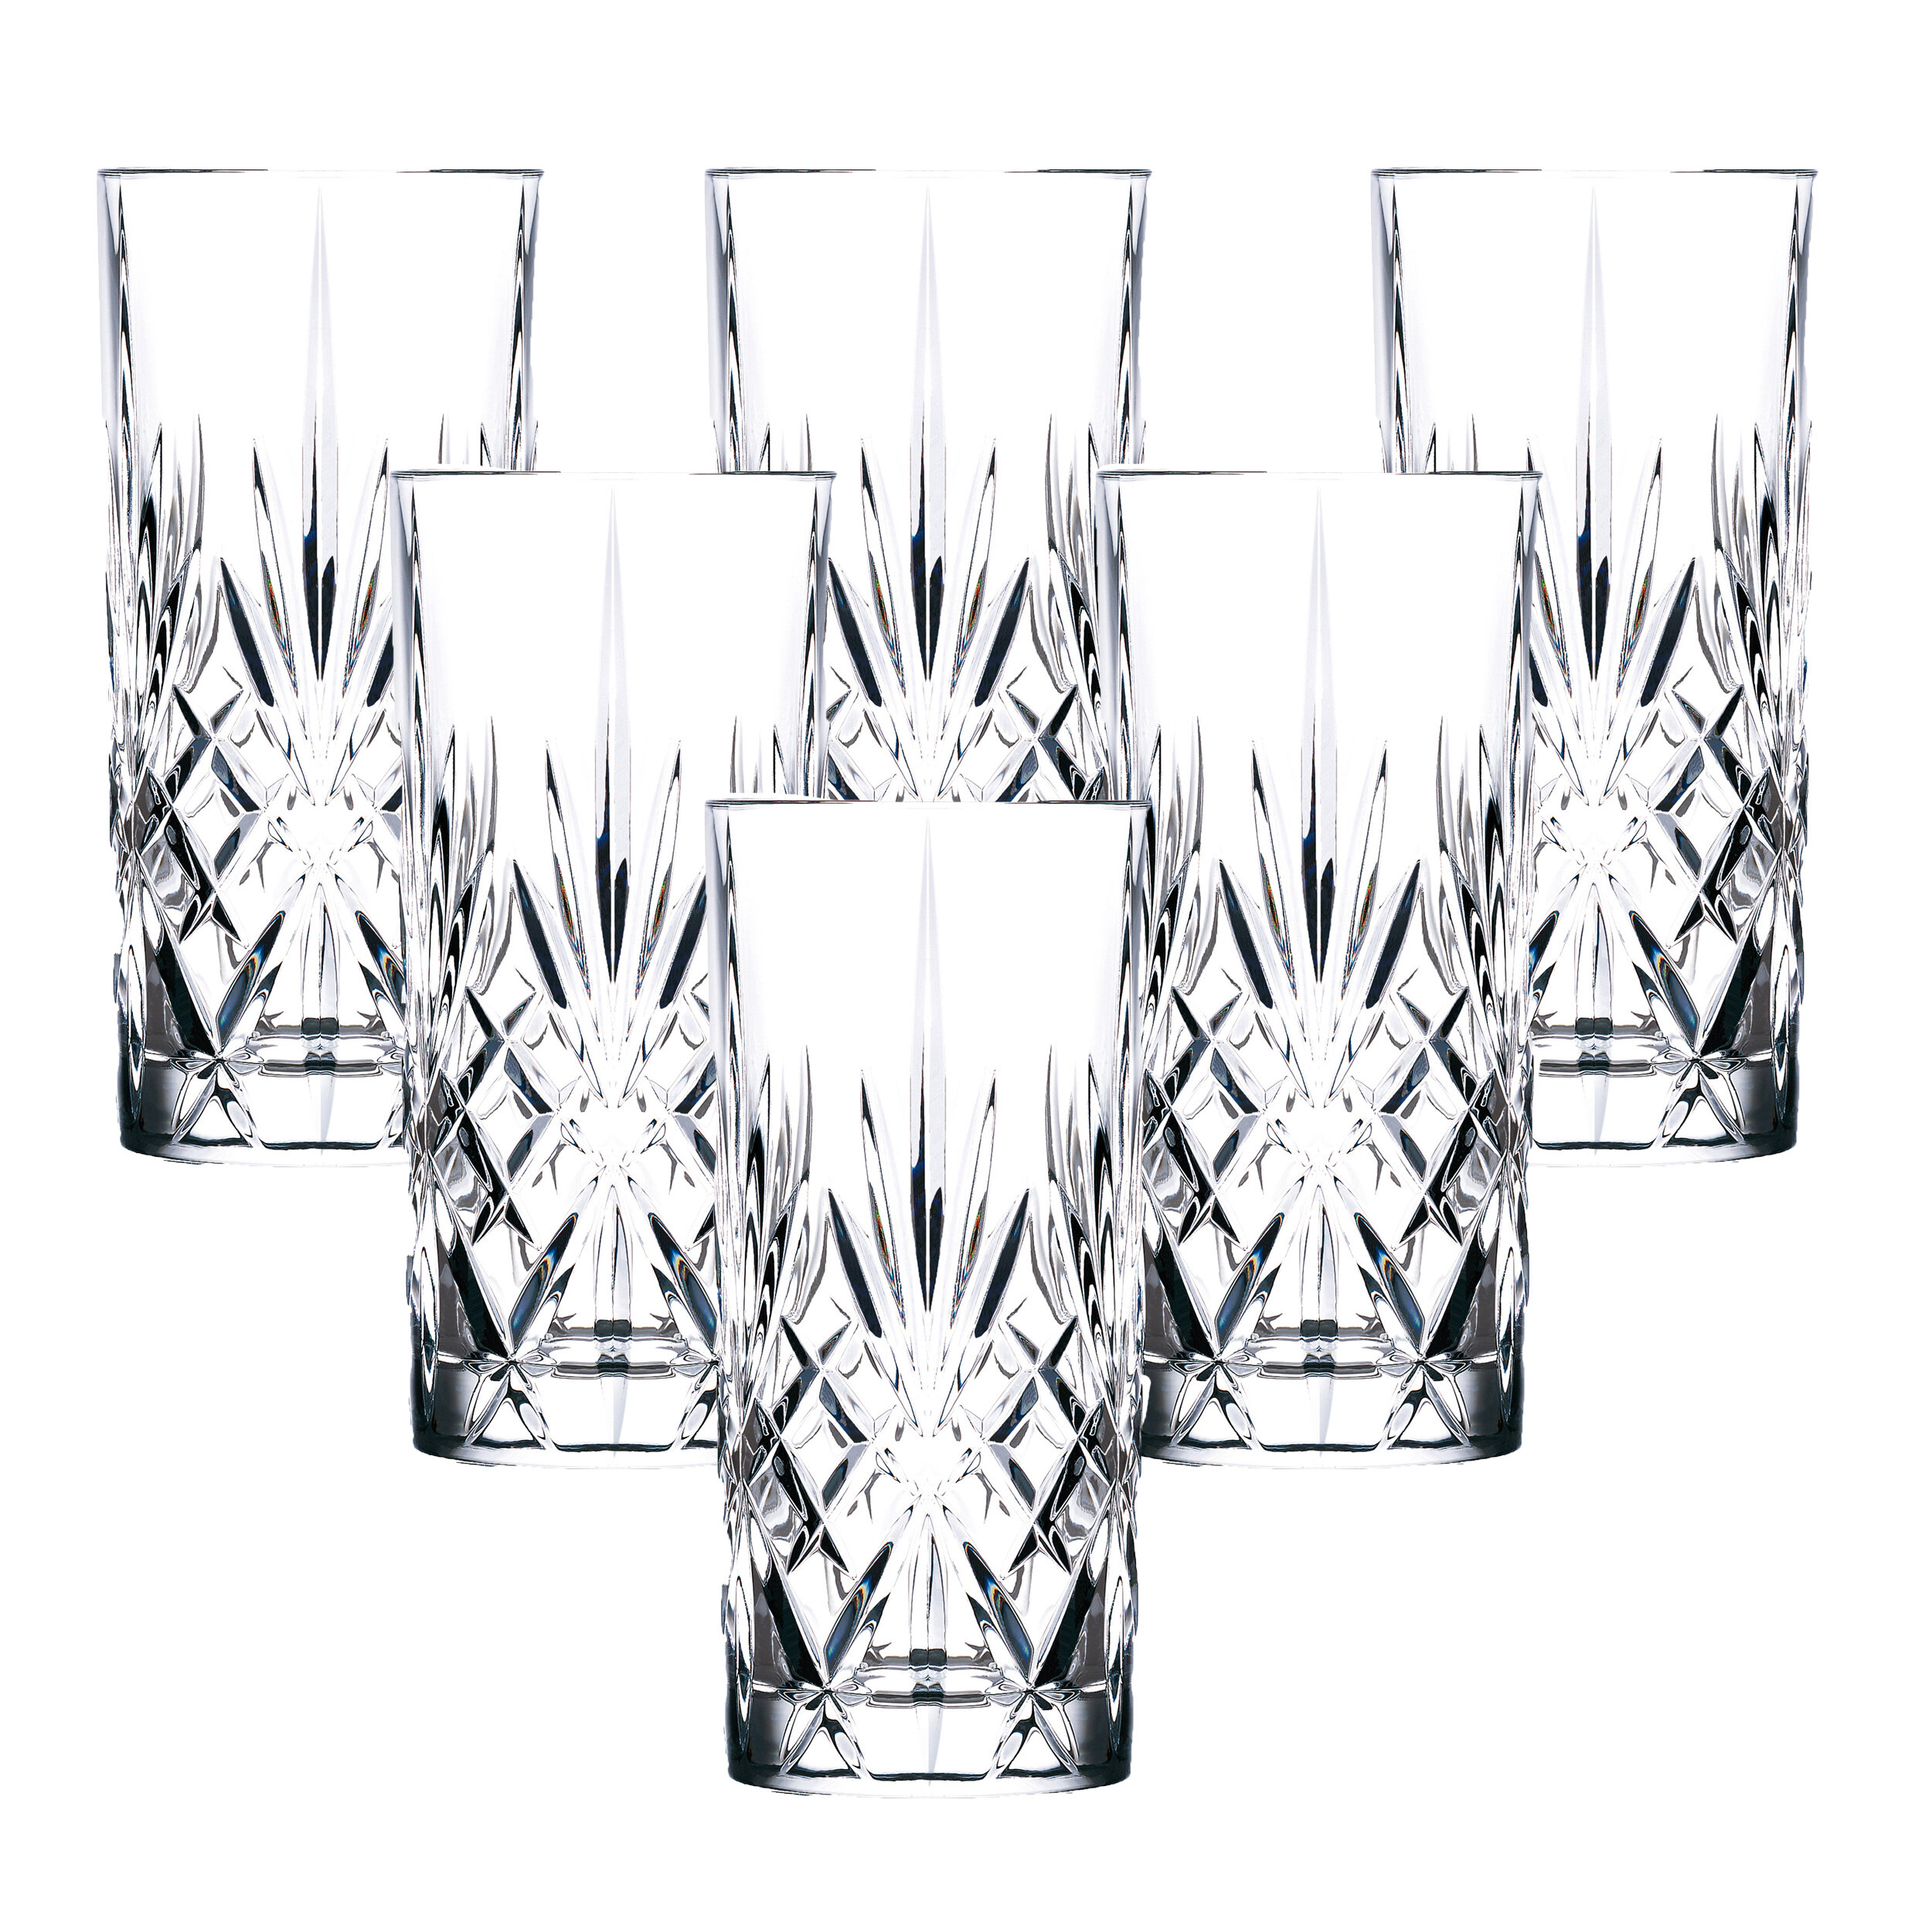 RCR LUXION Melodia Crystal Highball Tumblers 17 oz Drinking Glass Set of 2 